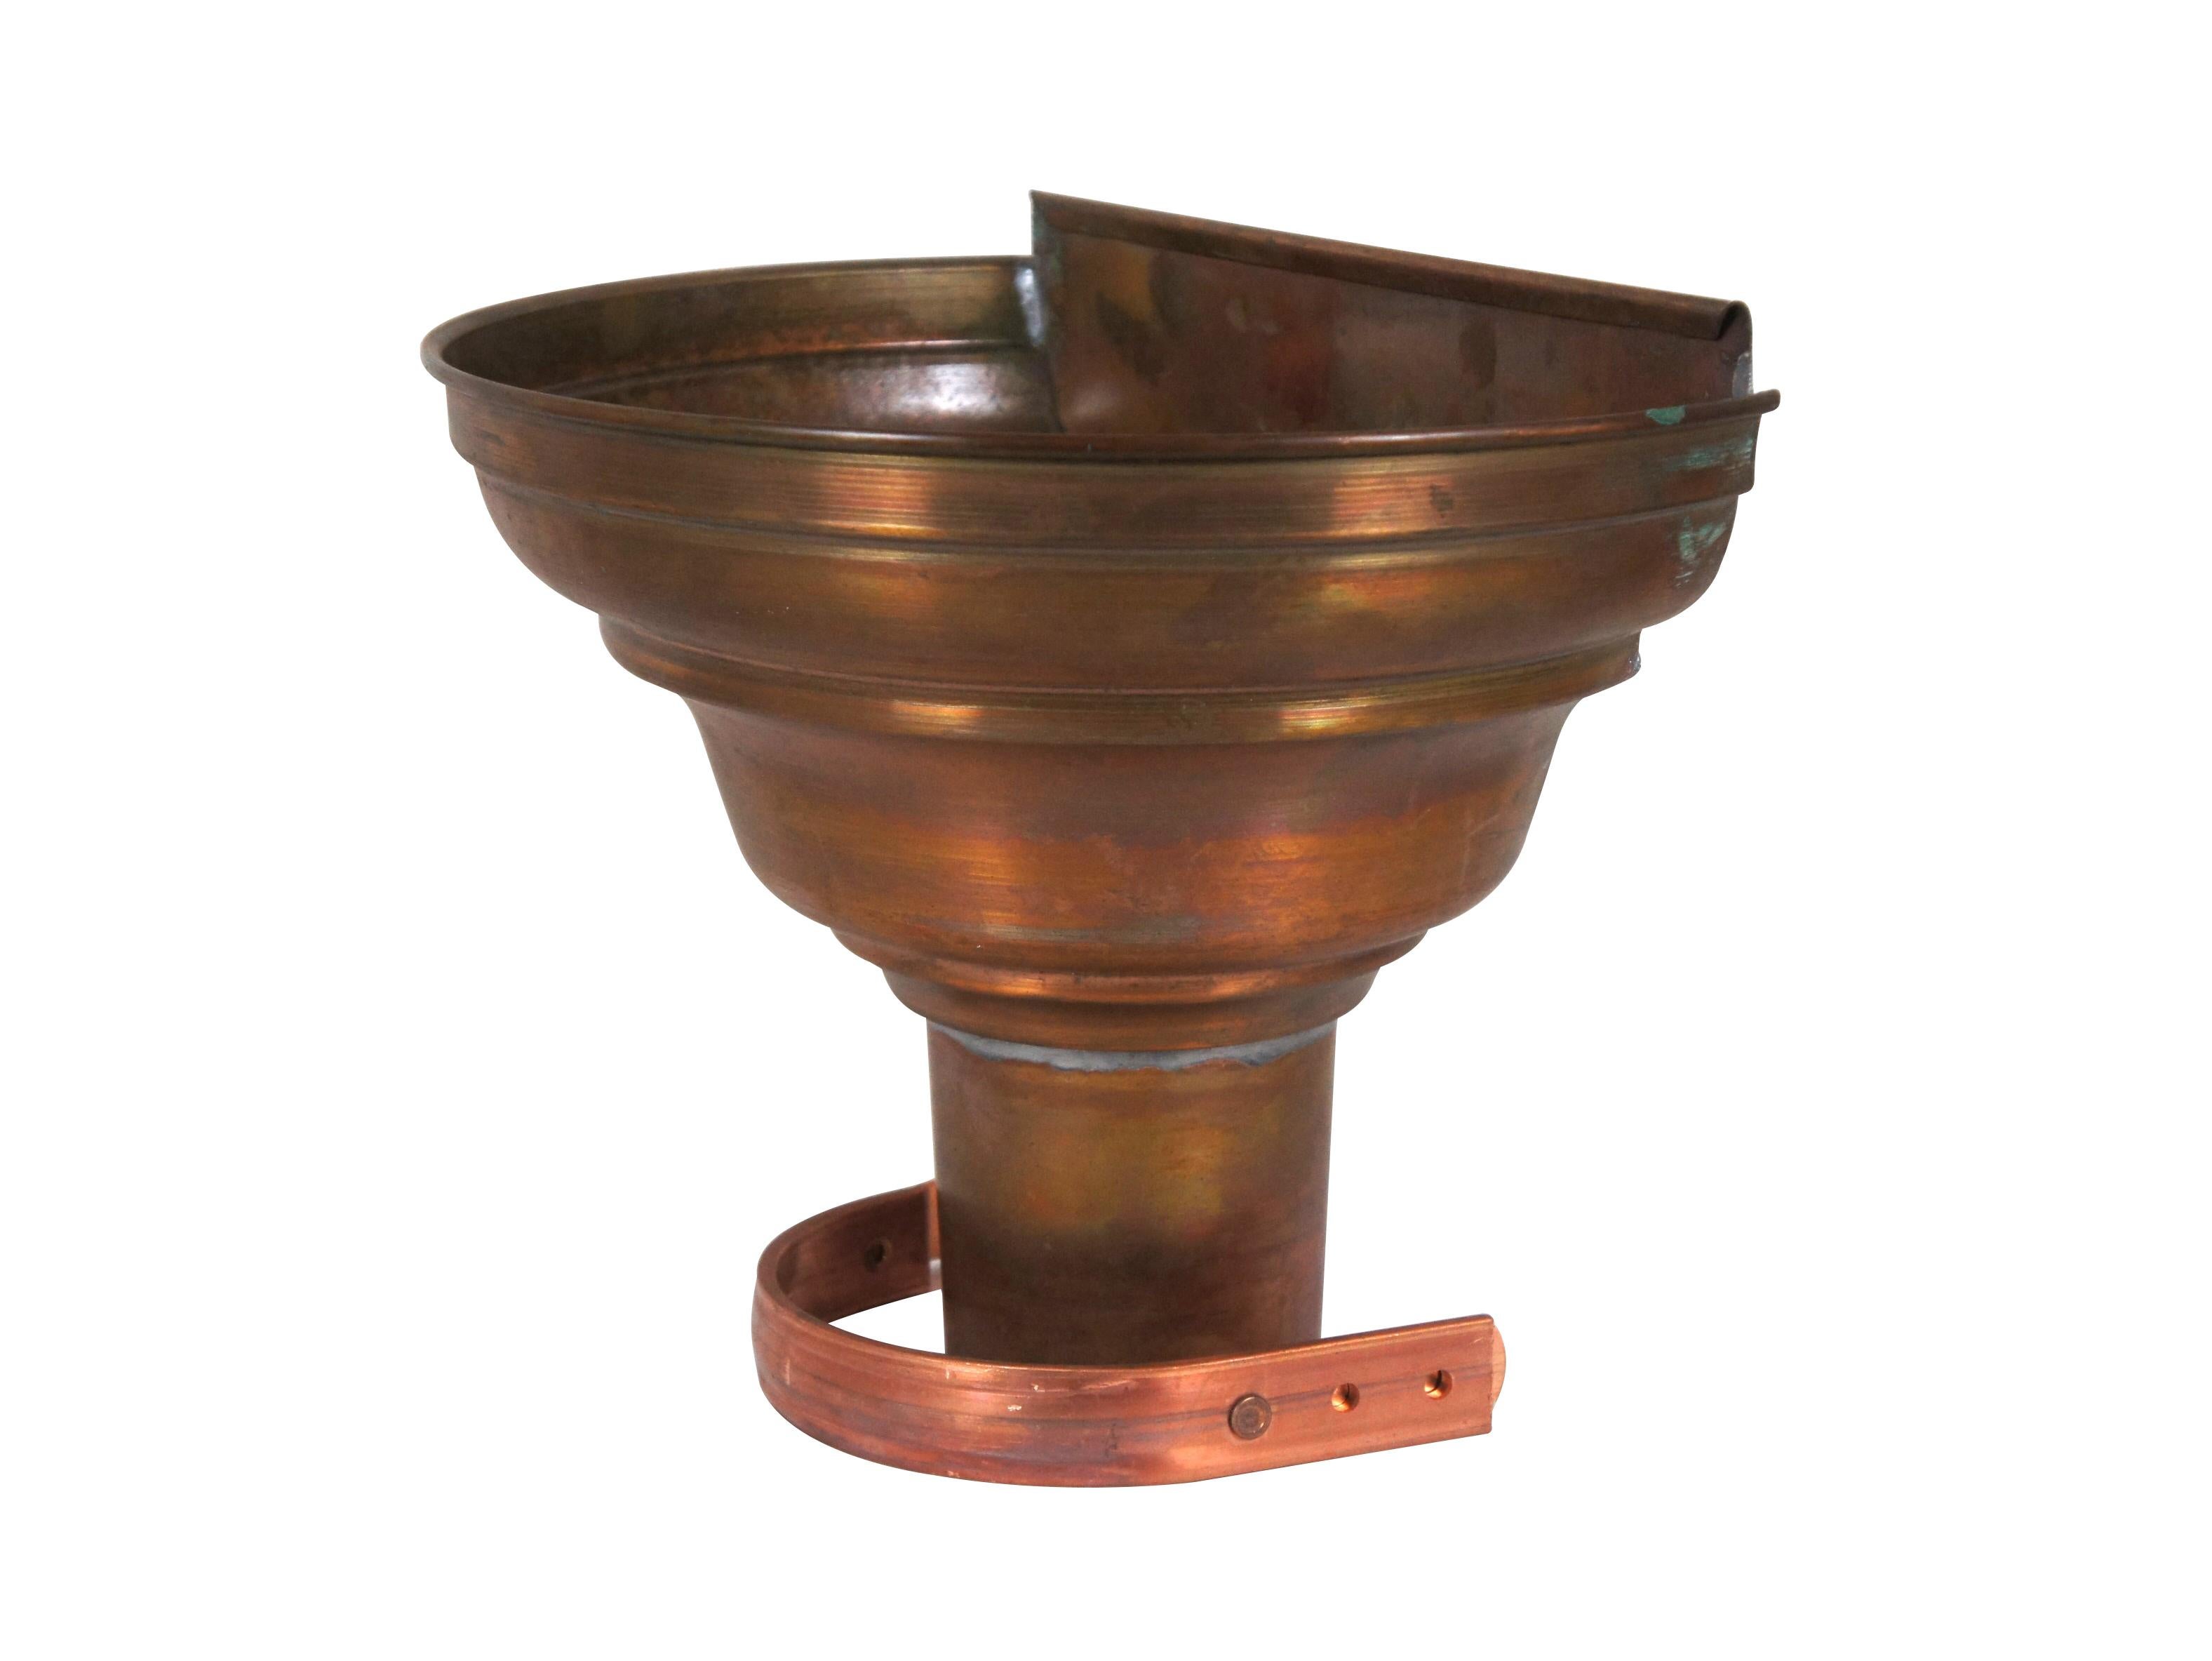 Late 20th century copper gutter leader head / leader box / hopper featuring a ridged and tapered half round / demi-lune form. Base Diameter 4